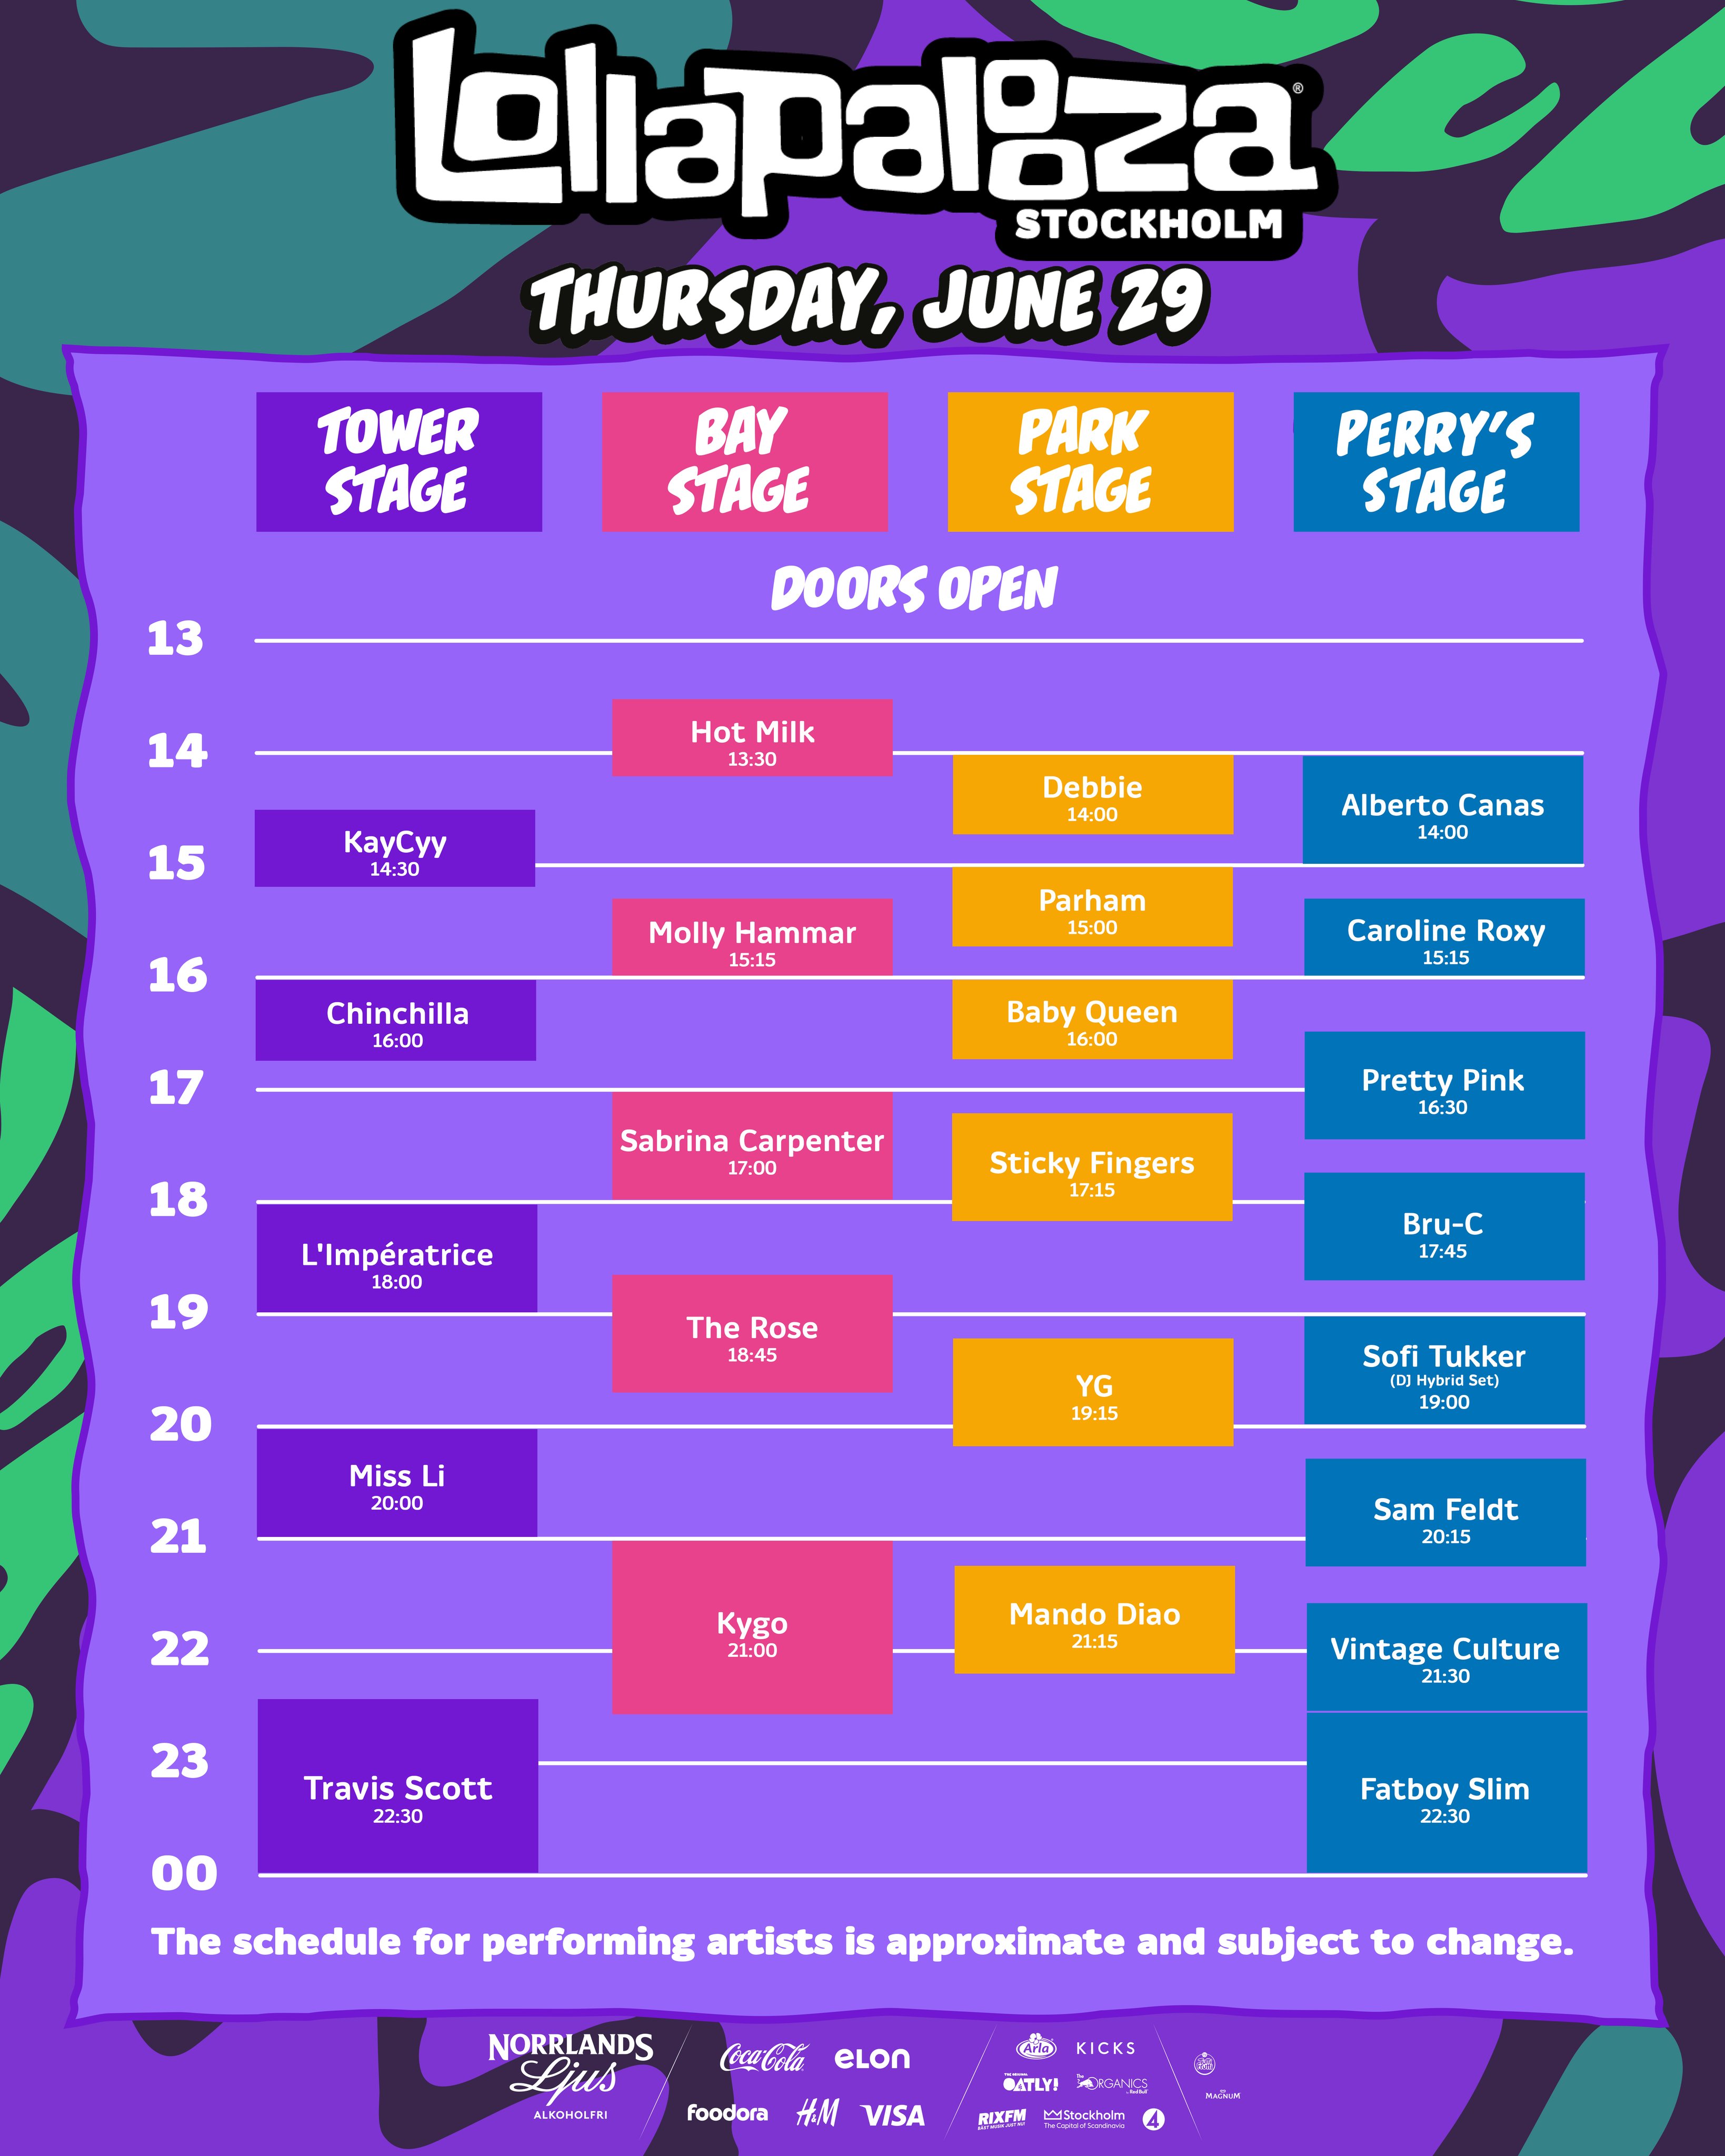 Lollapalooza - Your 2022 Lineup is here! 🙌 4-Day Tickets on sale now. www. lollapalooza.com